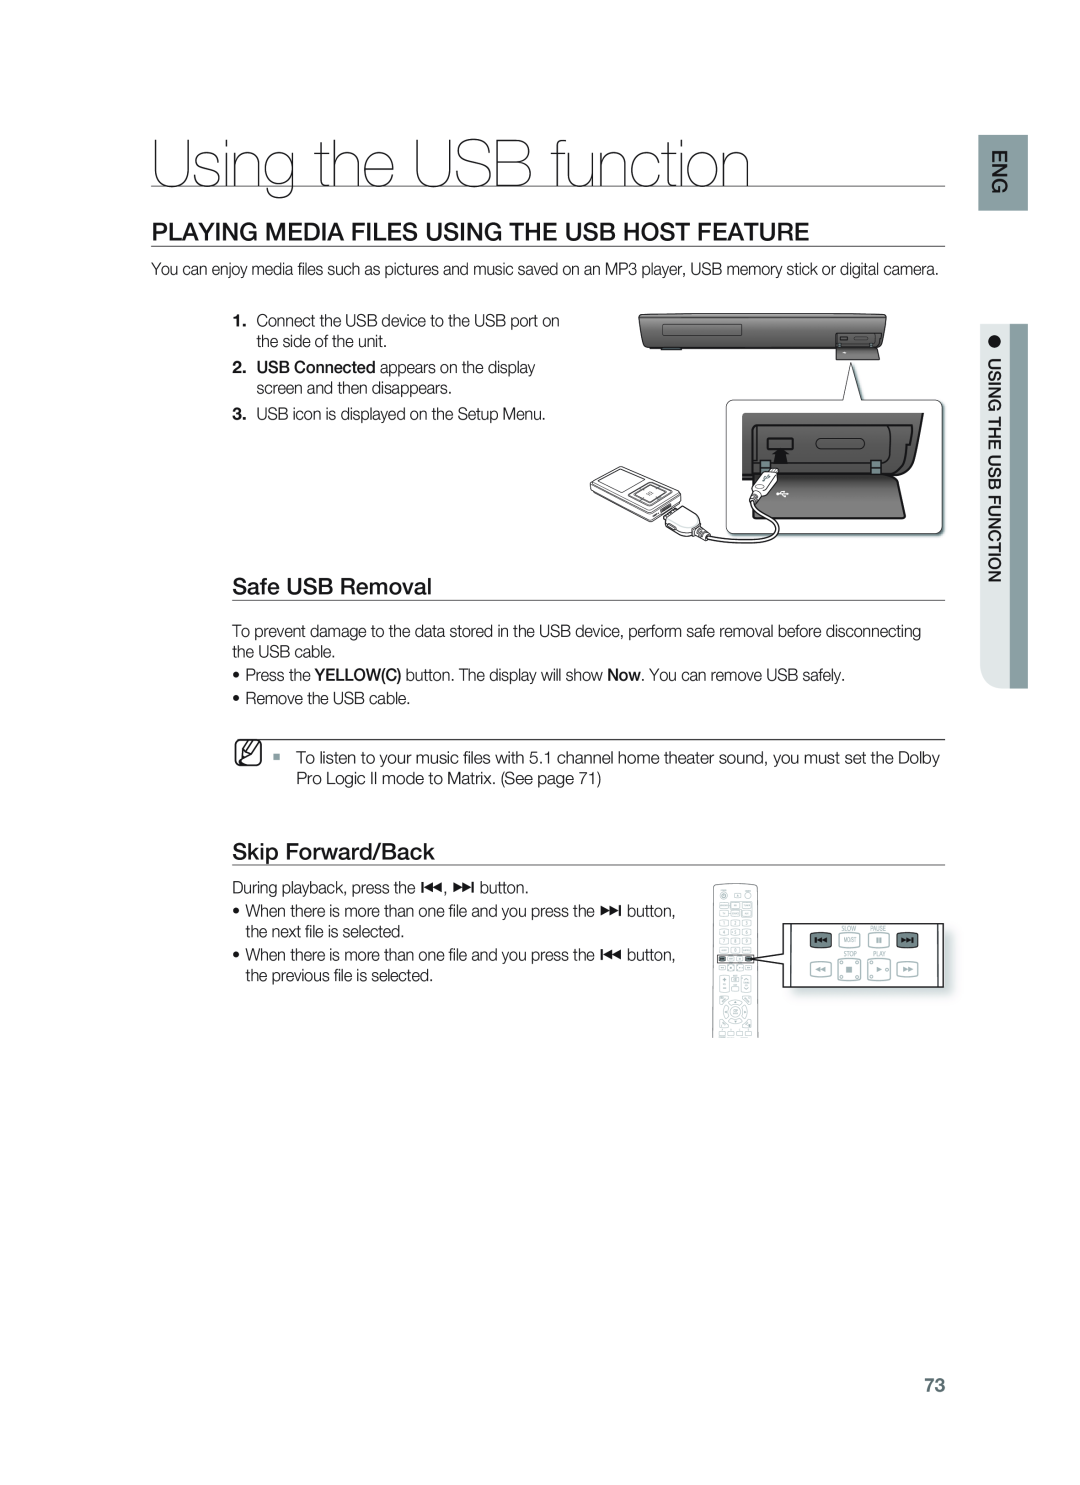 Samsung HT-BD1252, HT-BD1255 Using the USB function, Playing Media Files Using The Usb Host Feature, Safe USB Removal 